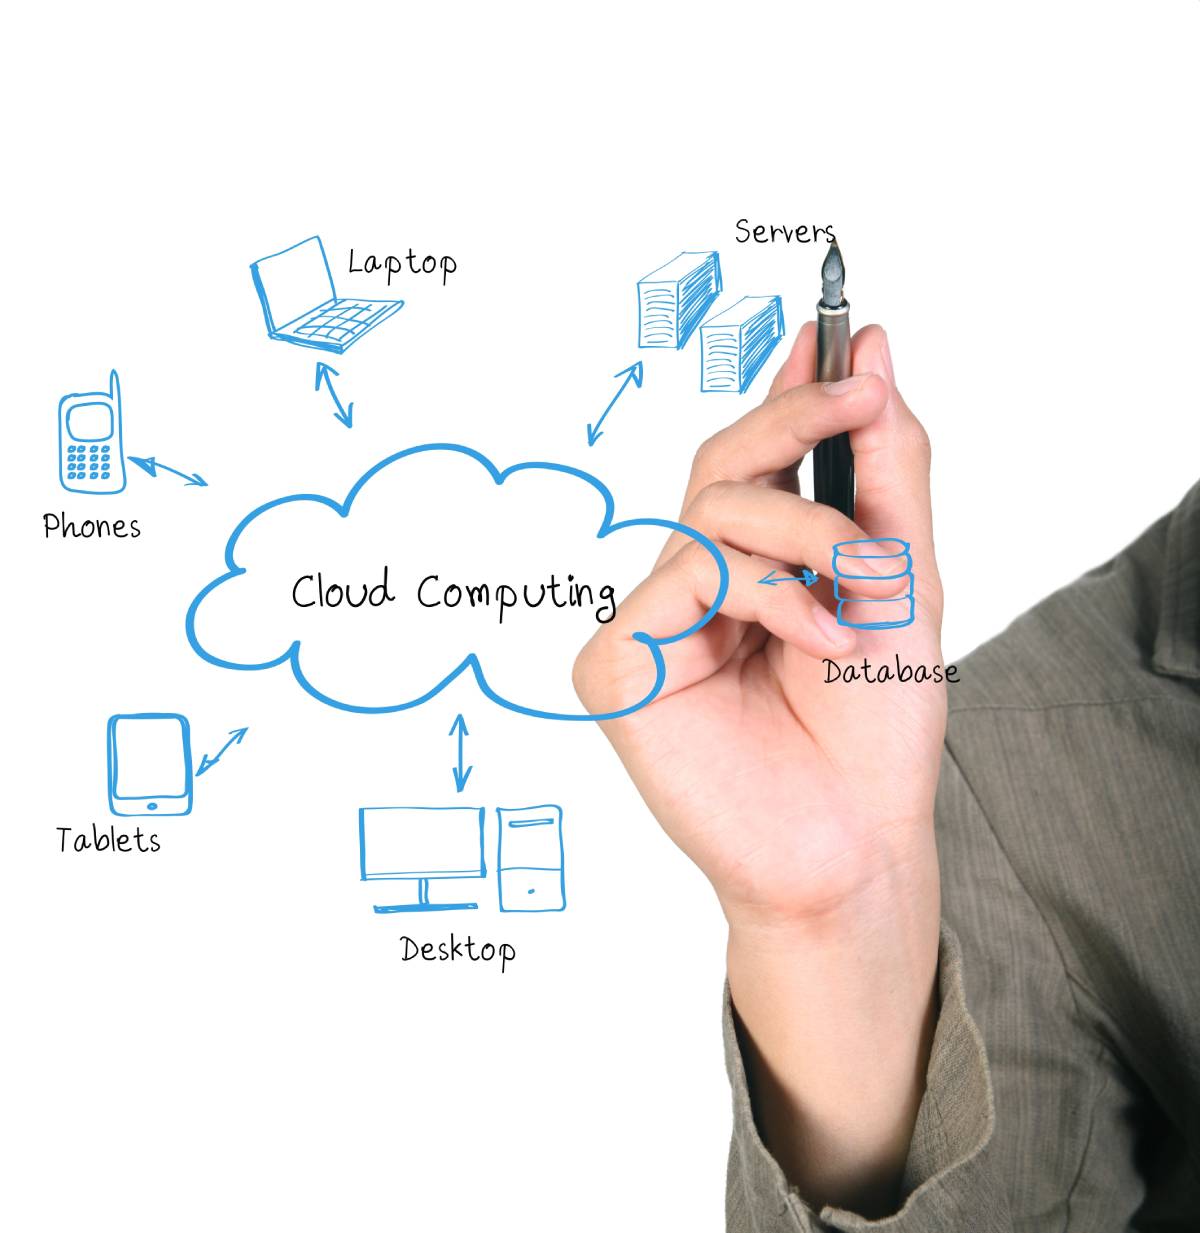 A drawing of a cloud and connected devices, and a man holding a pen finishing writing servers